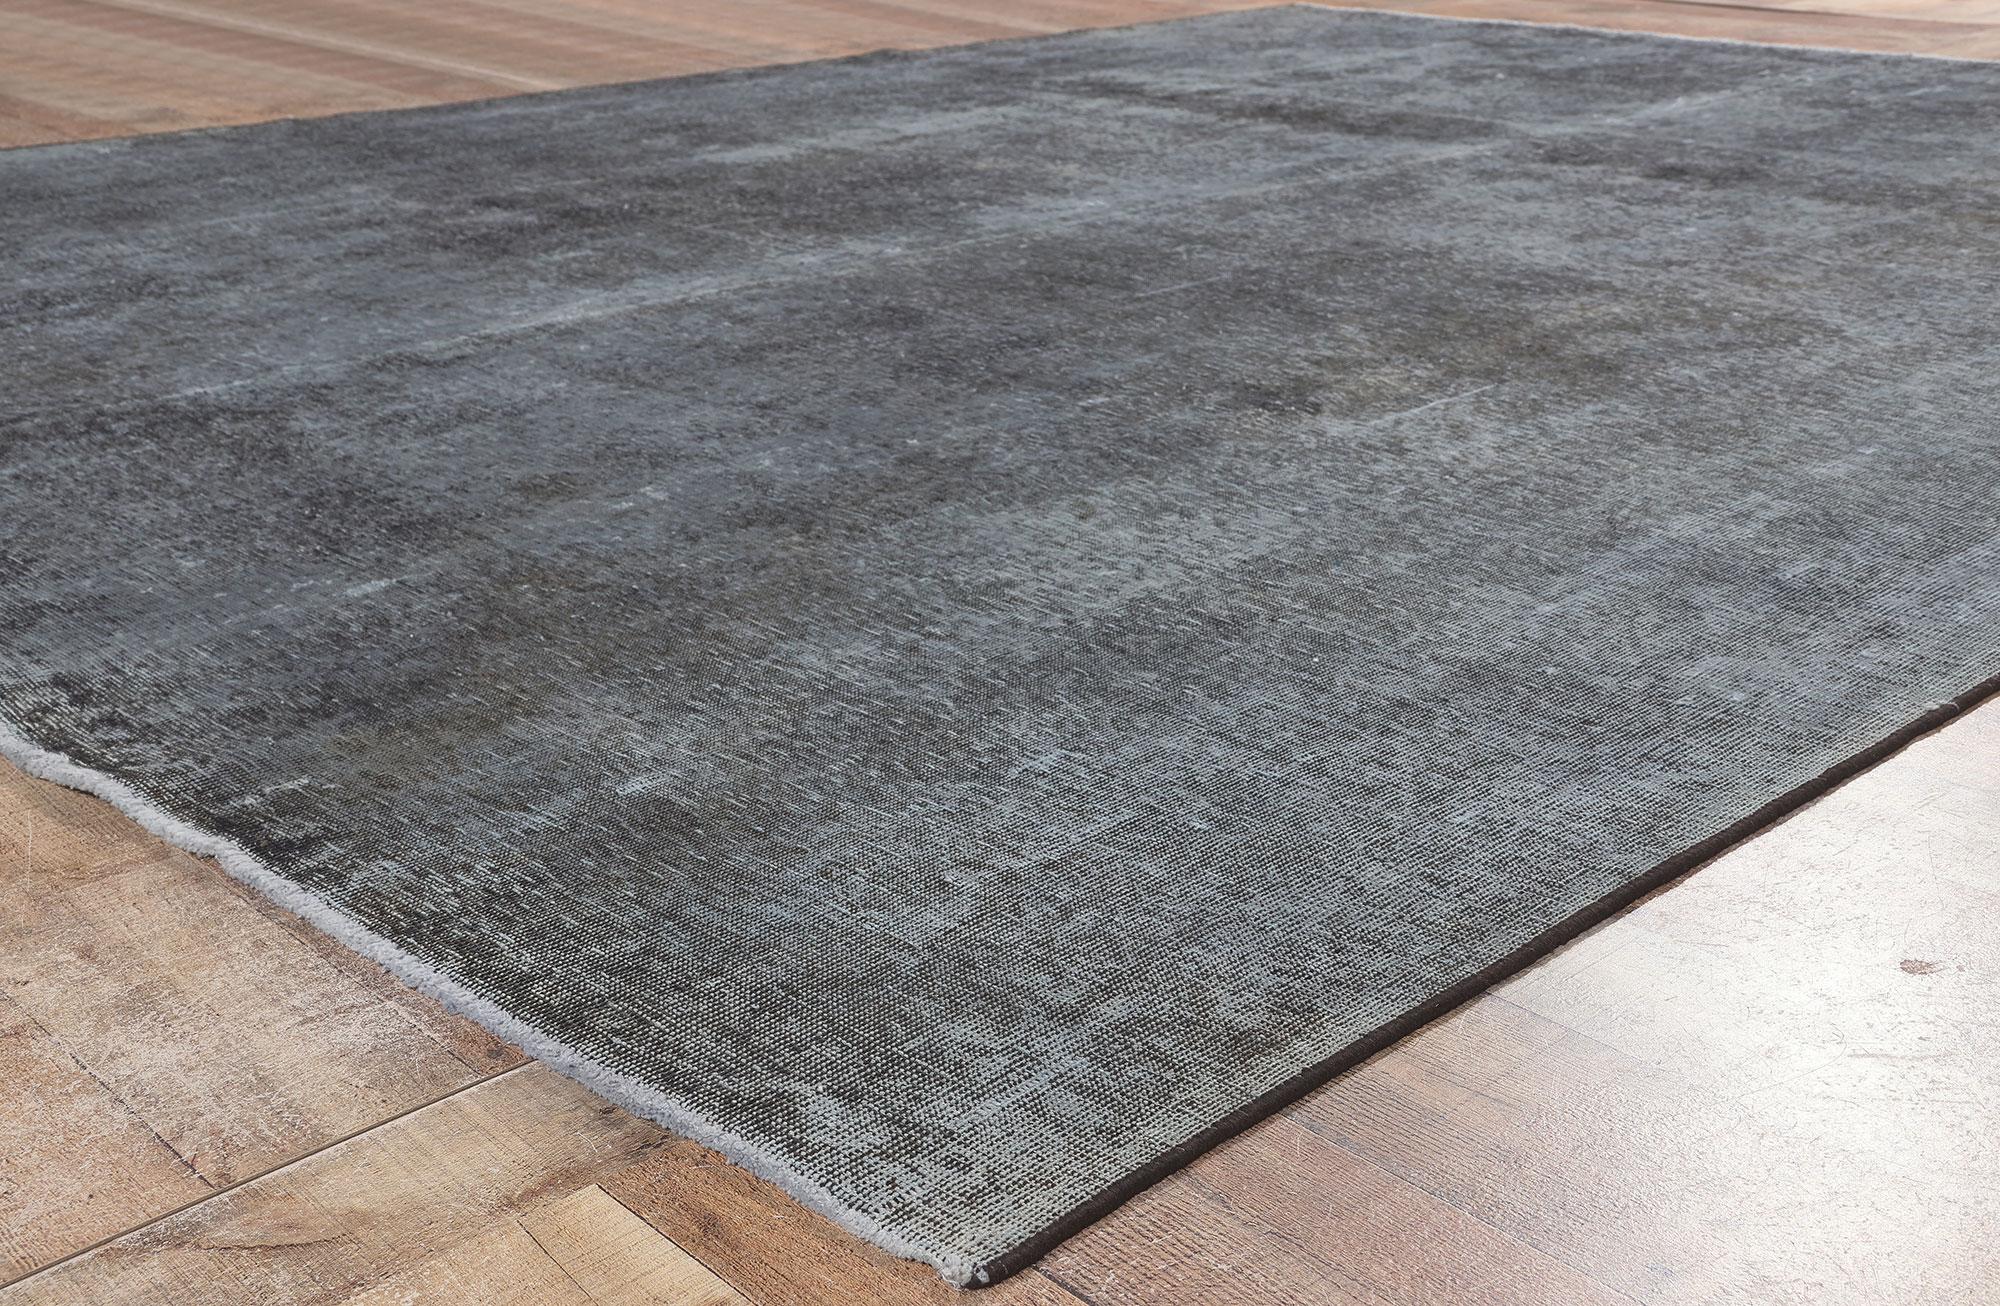 78593 Vintage Persian Slate Overdyed Rug, 10'00 x 13'06. 
Sophisticated elegance meets luxe utilitarian appeal in this vintage Persian overdyed rug. The modern industrial charm and monochromatic color planes woven into this piece work together